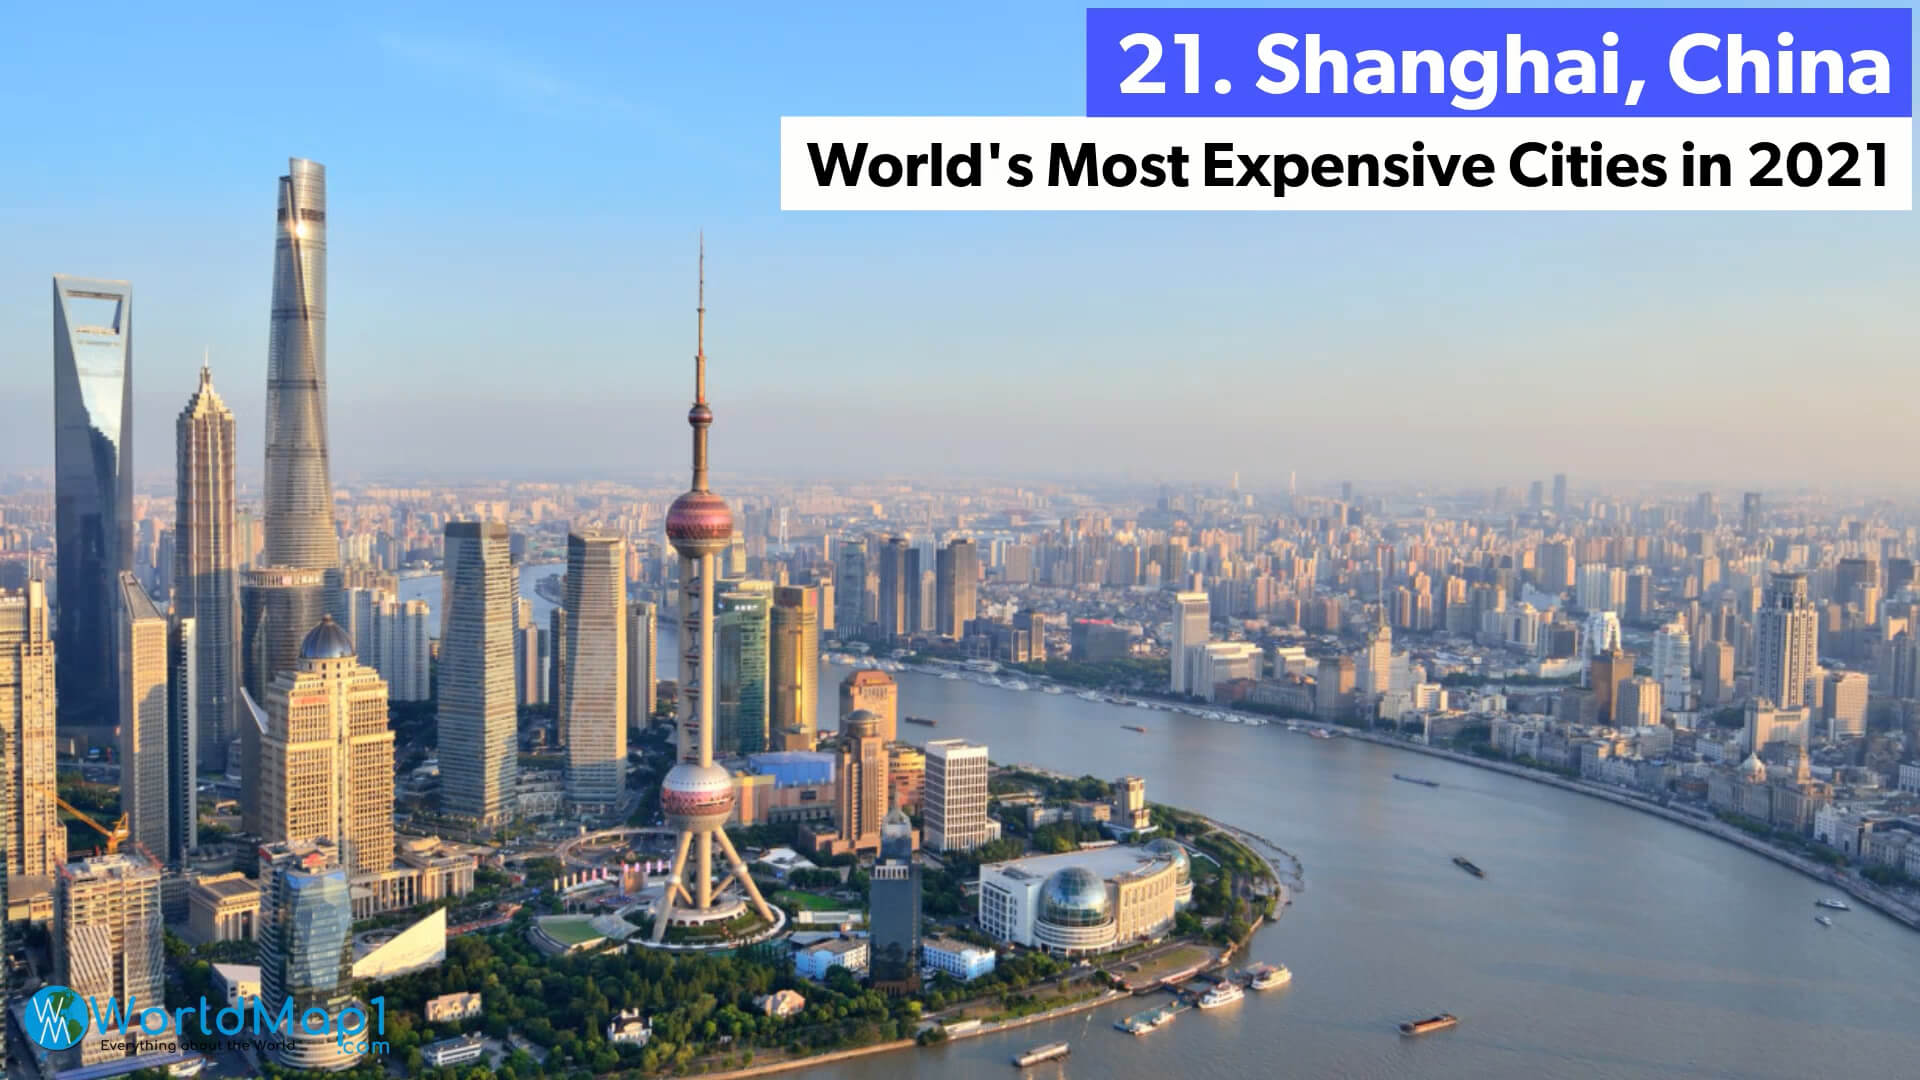 World's Most Expensive Cities - Shanghai, China